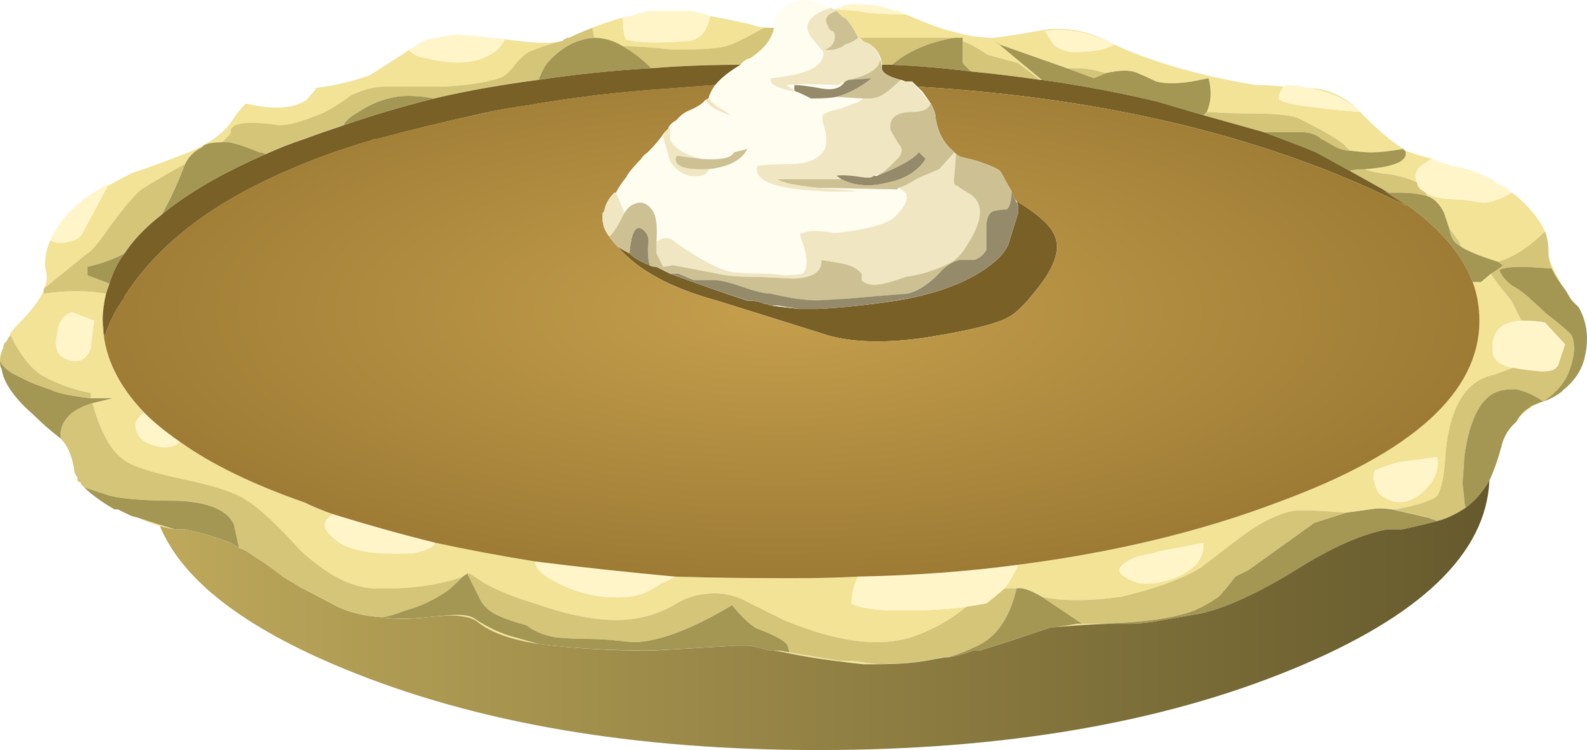 Pumpkin Pie With Whipped Cream Top PNG